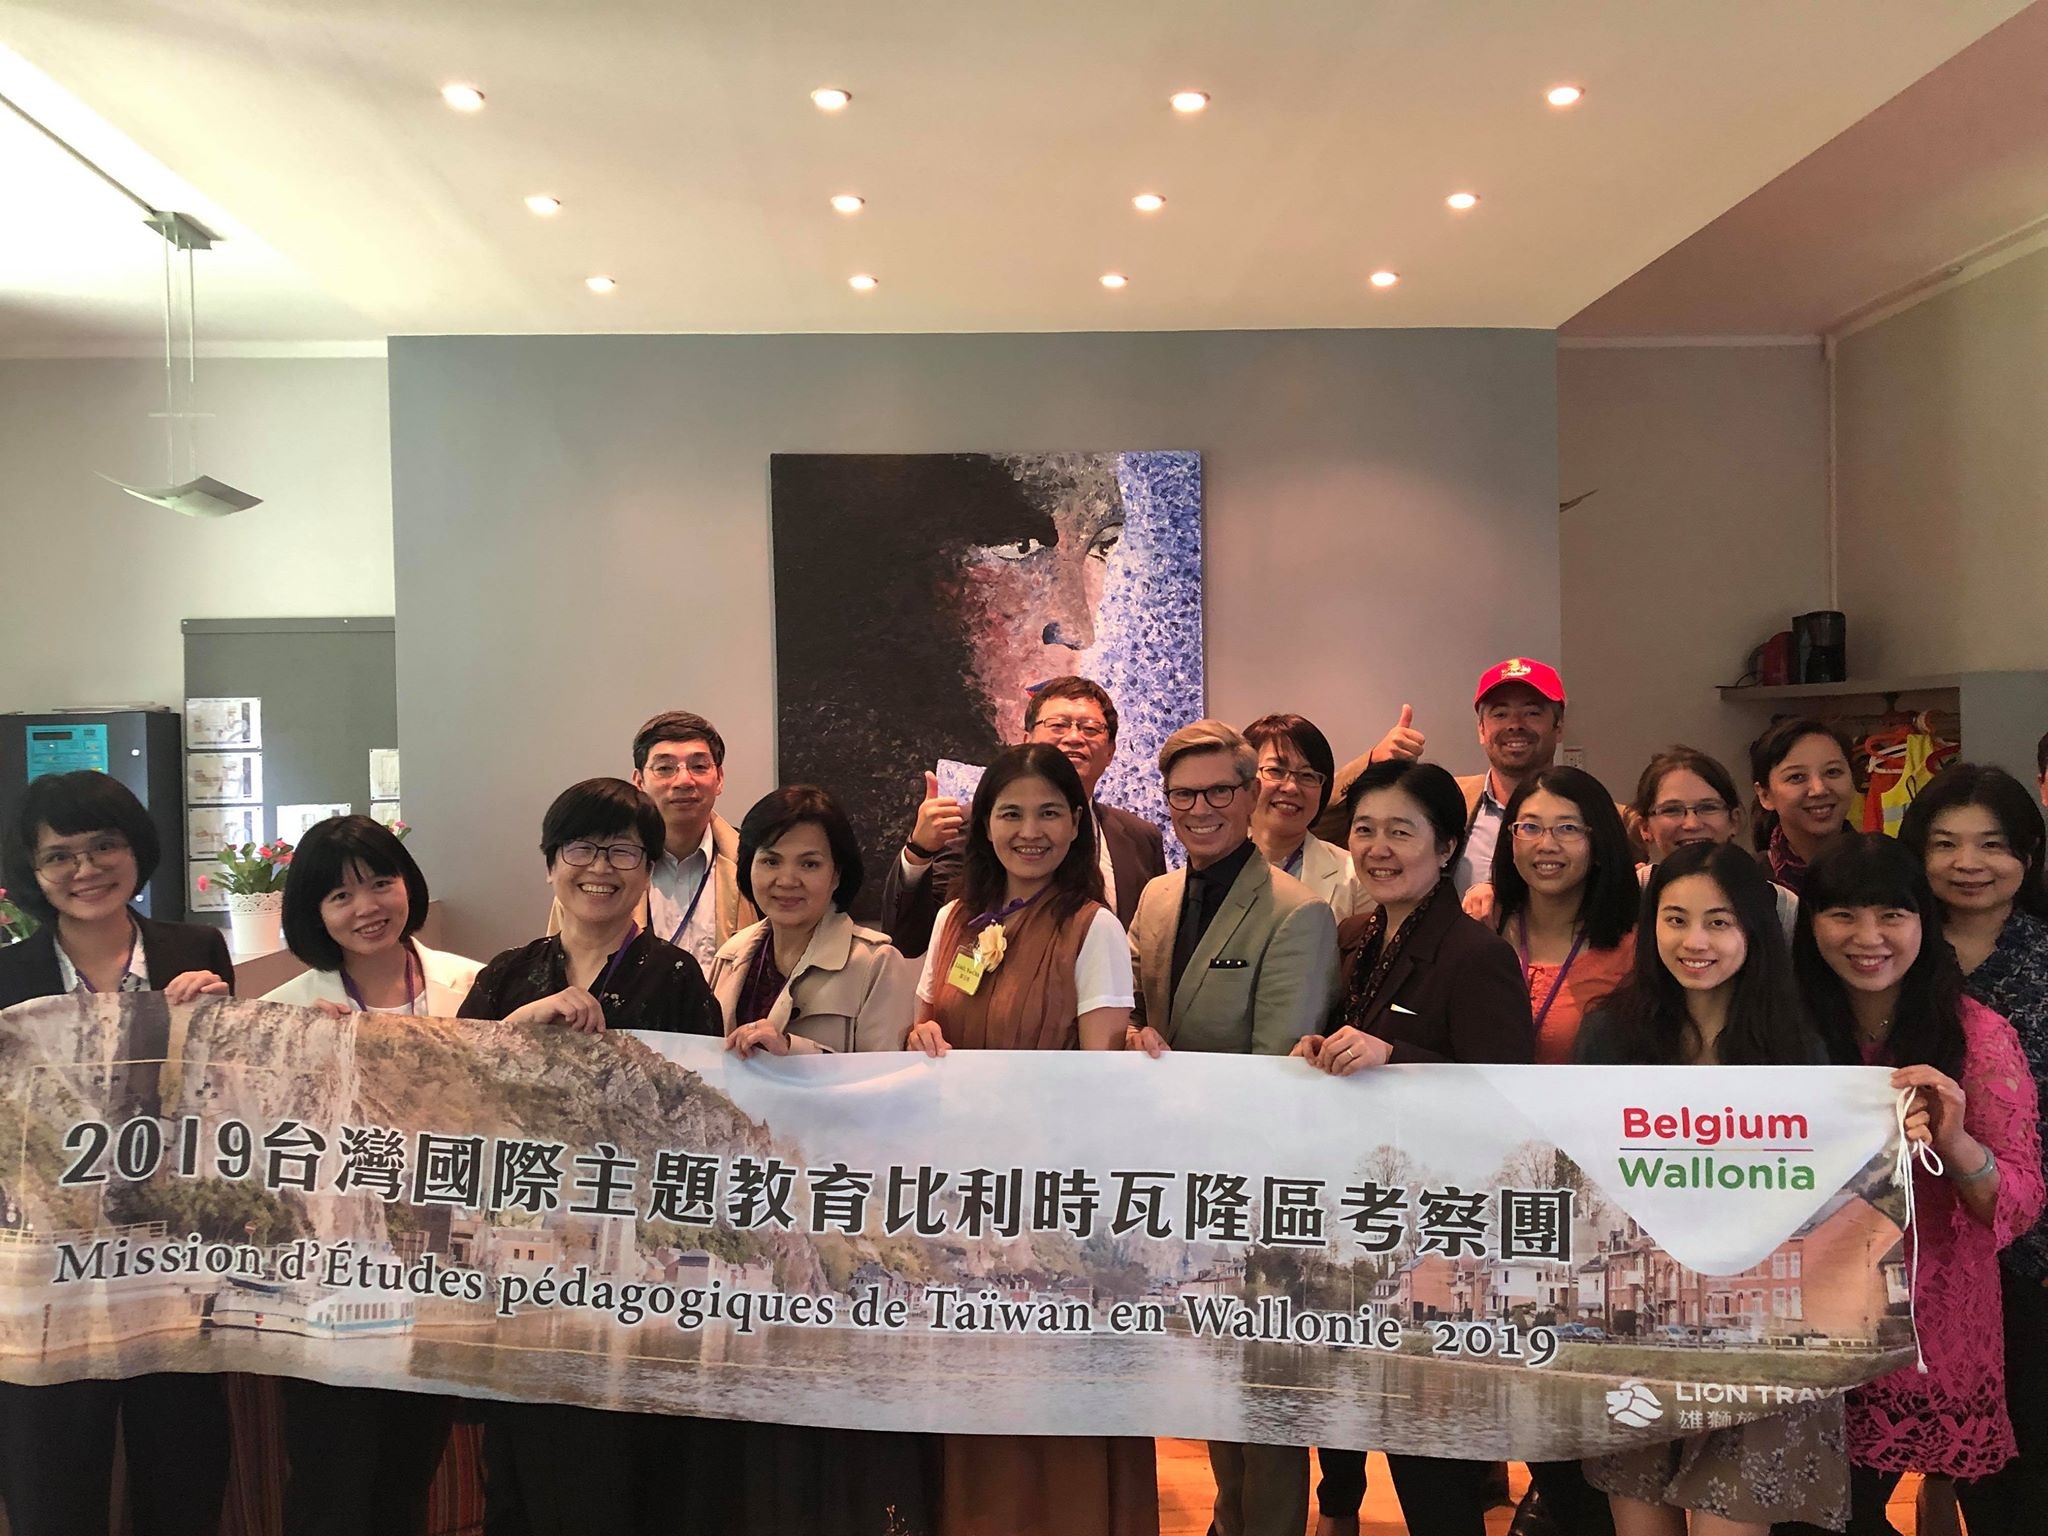 2019 Taiwan Educational Mission to the Walloon Region